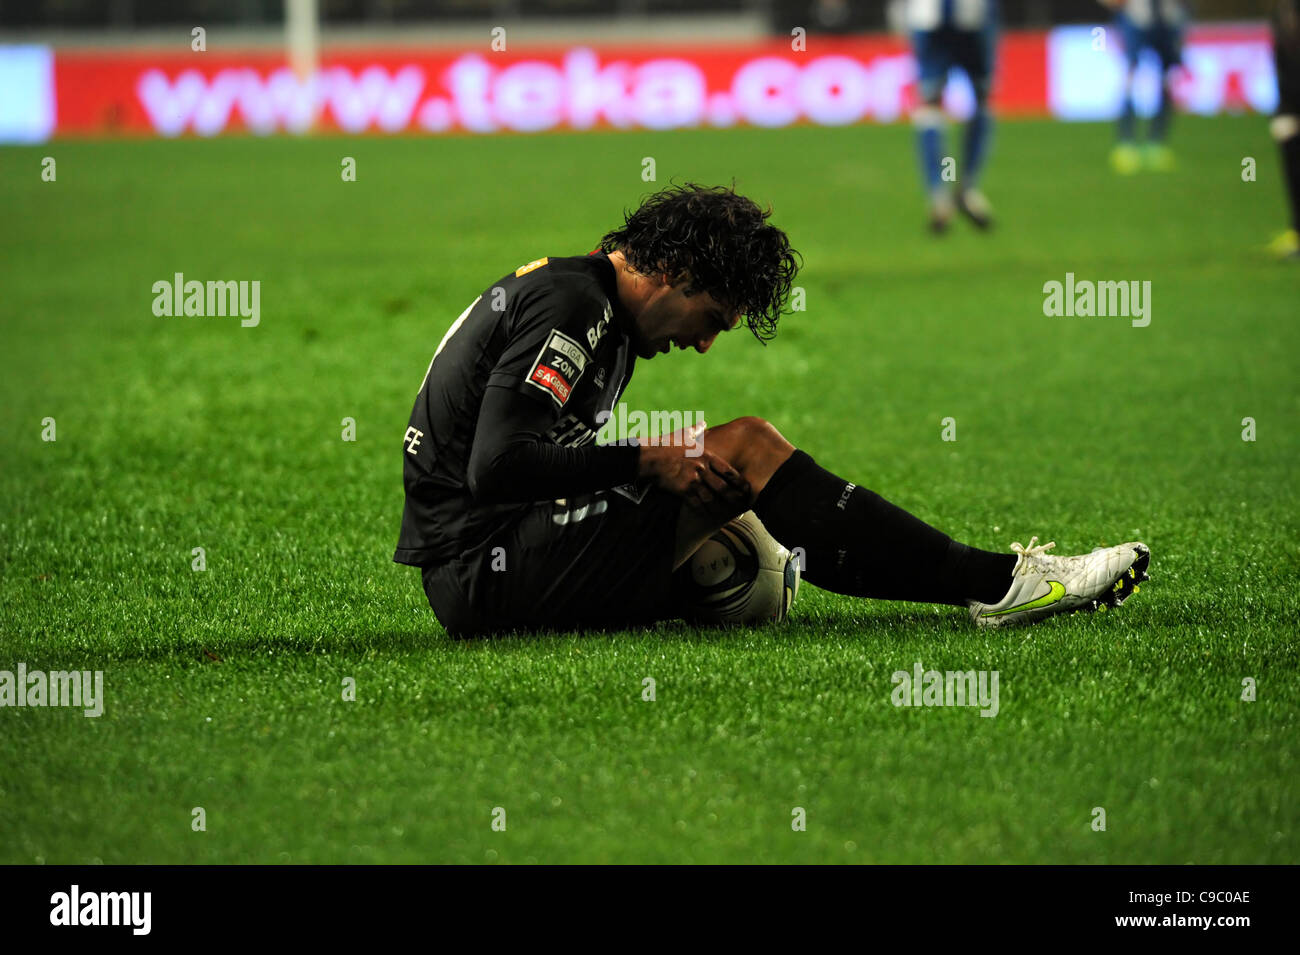 Football player with knee injury Stock Photo